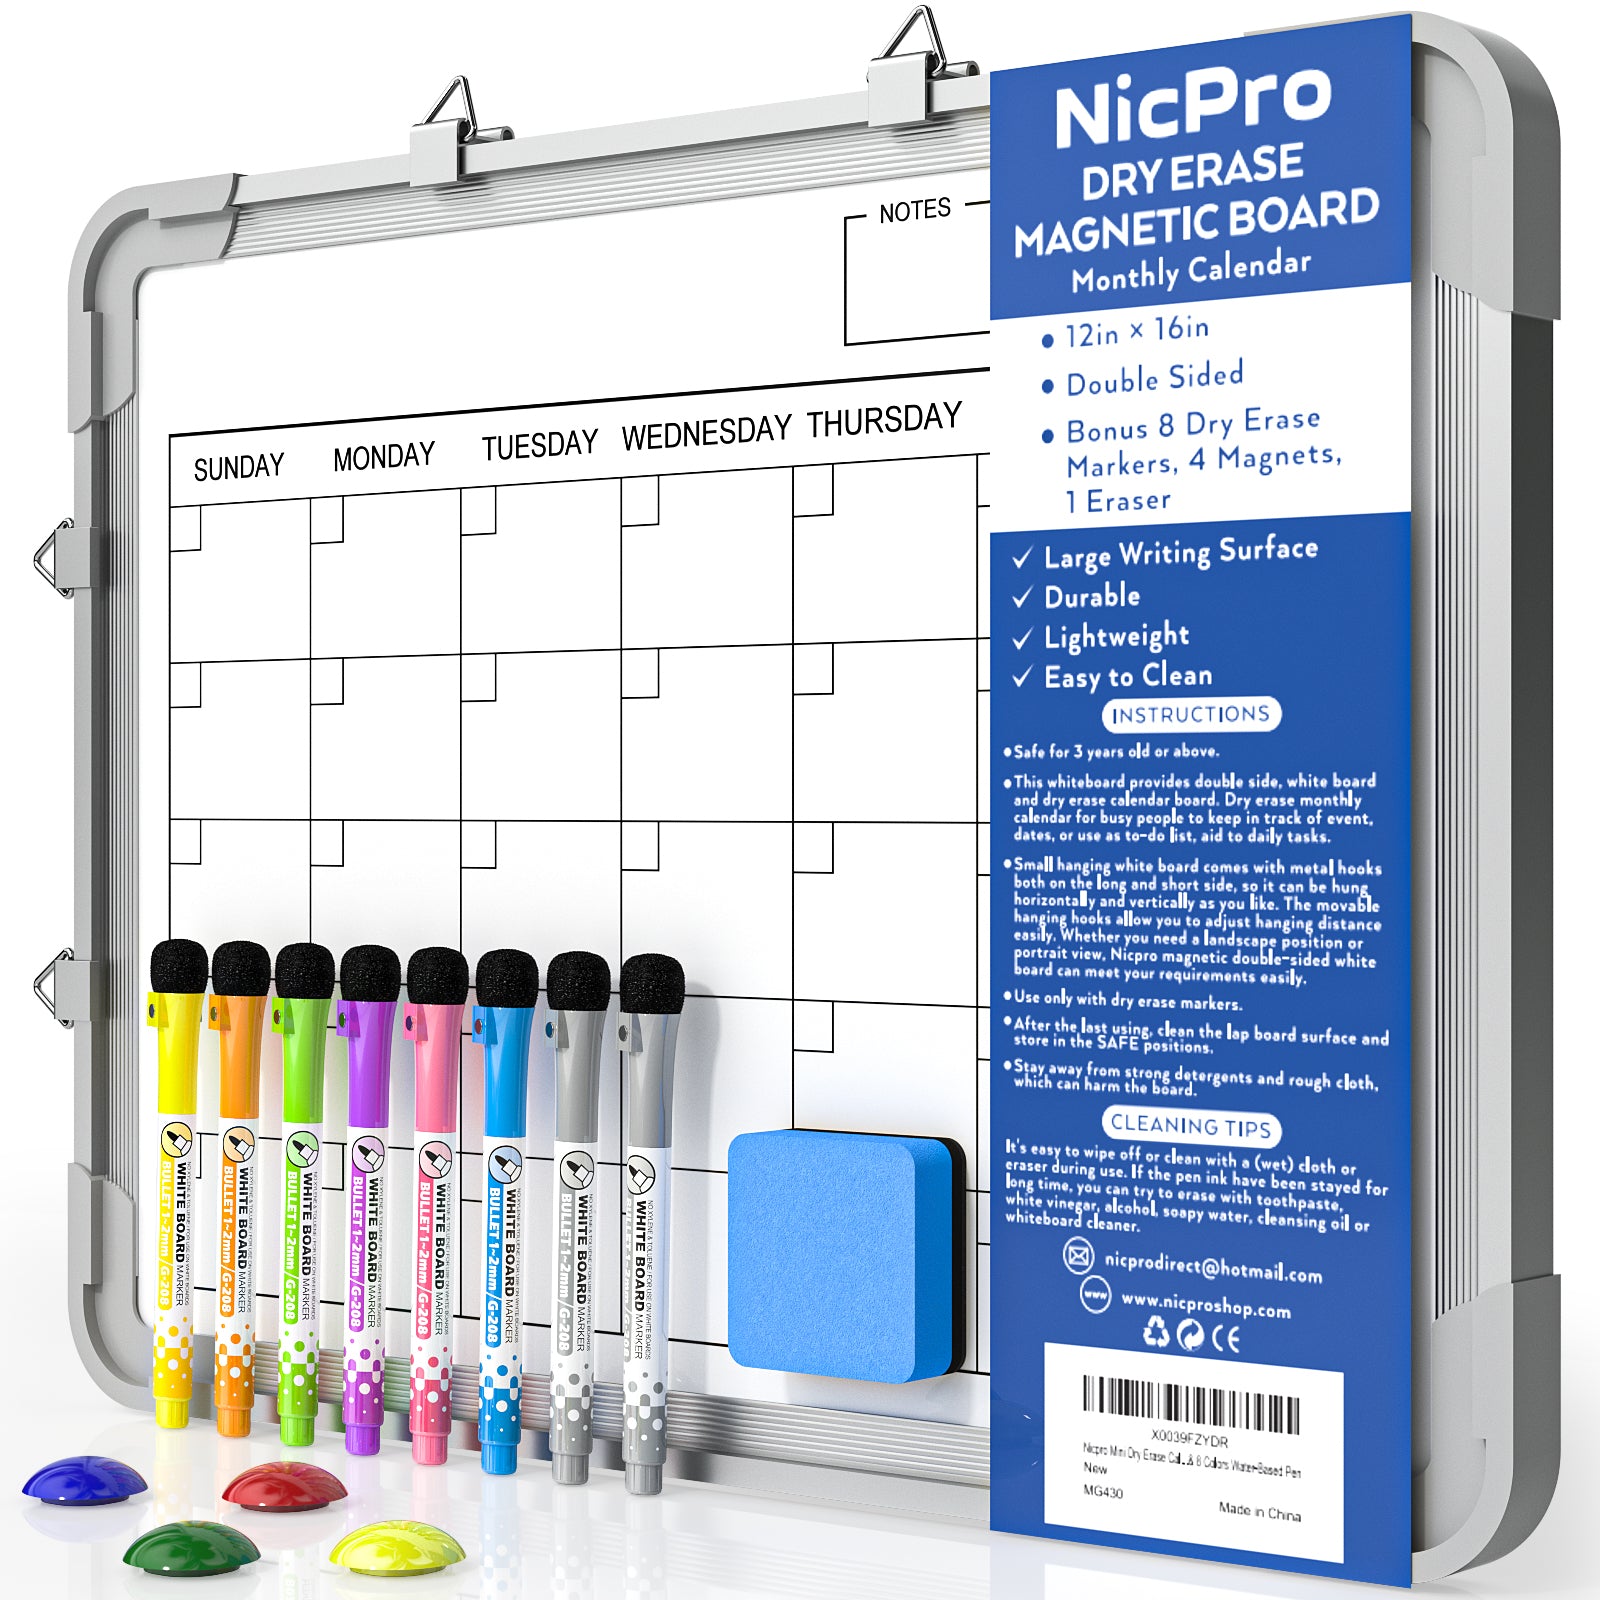 12 x 18 Double Magnetized Dry Erase Sheets - Discount Magnet